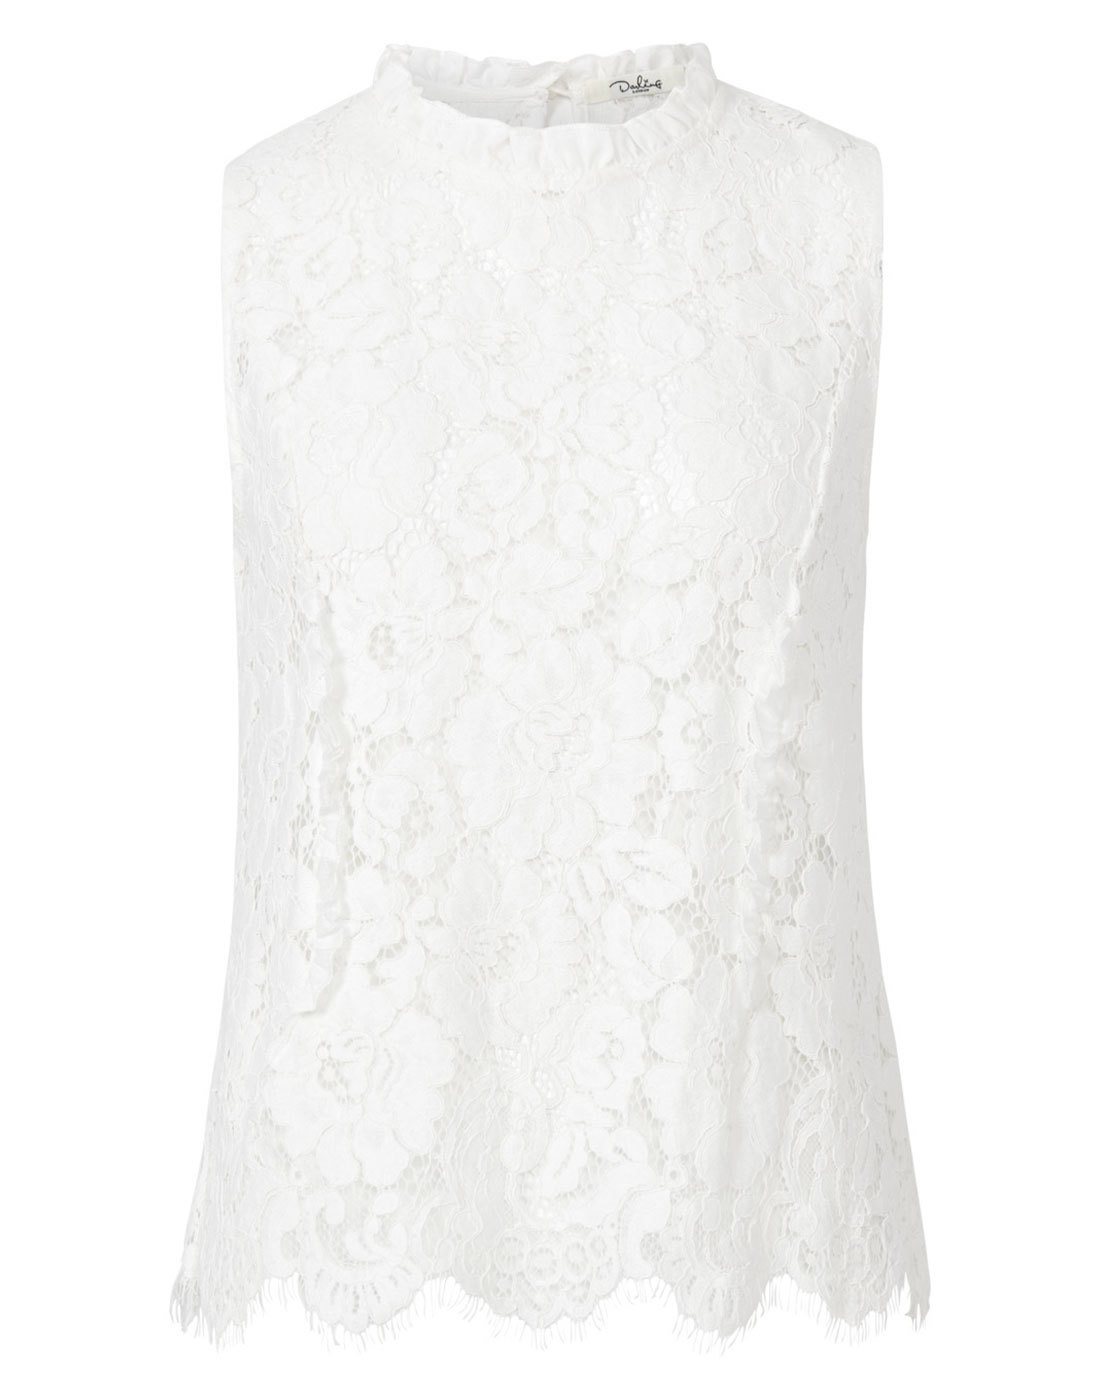 Fredrika DARLING Retro Floral Lace Sleeveless Top